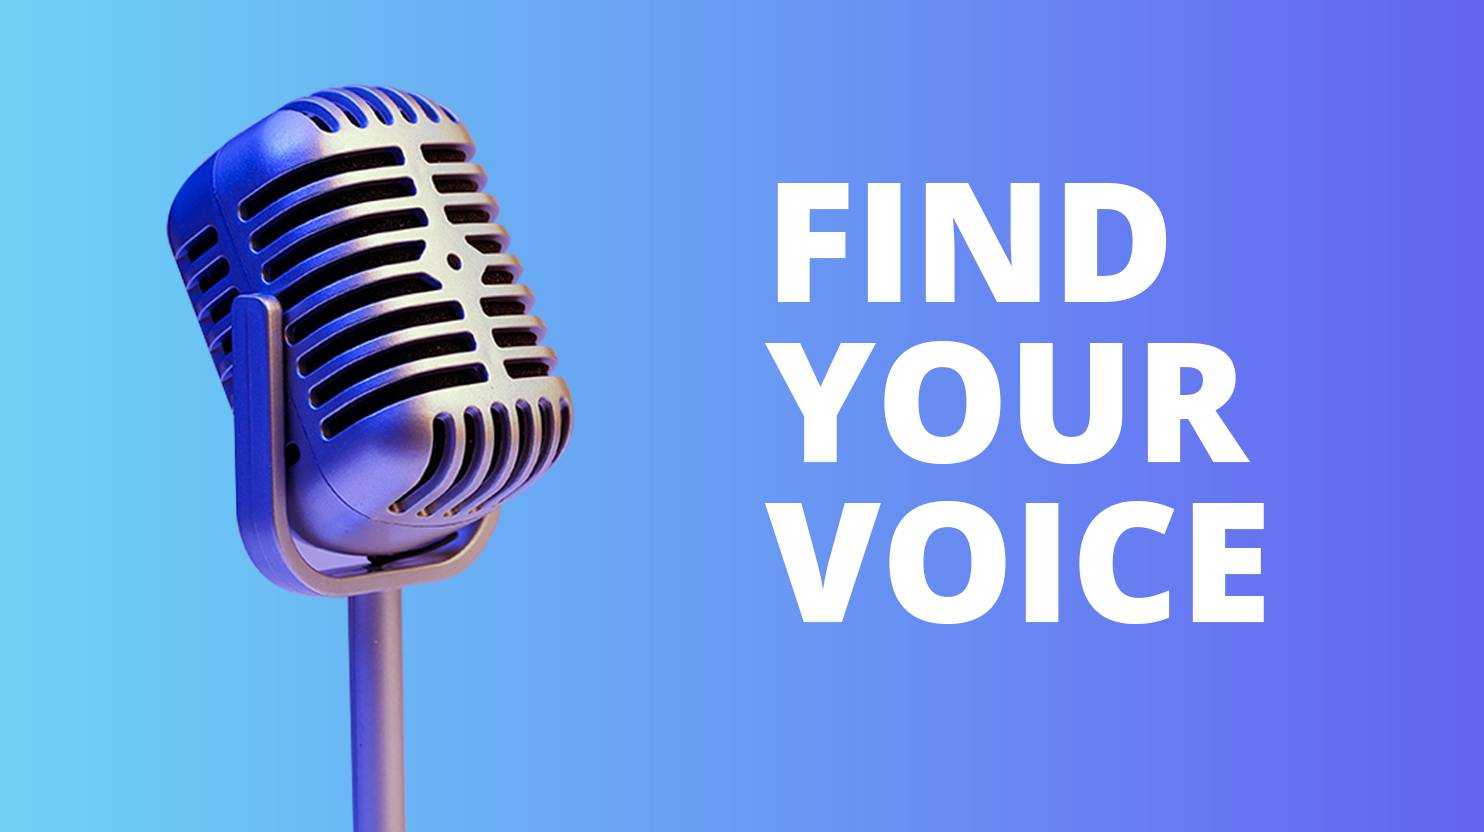 "Find your voice" with a microphone to the left of it